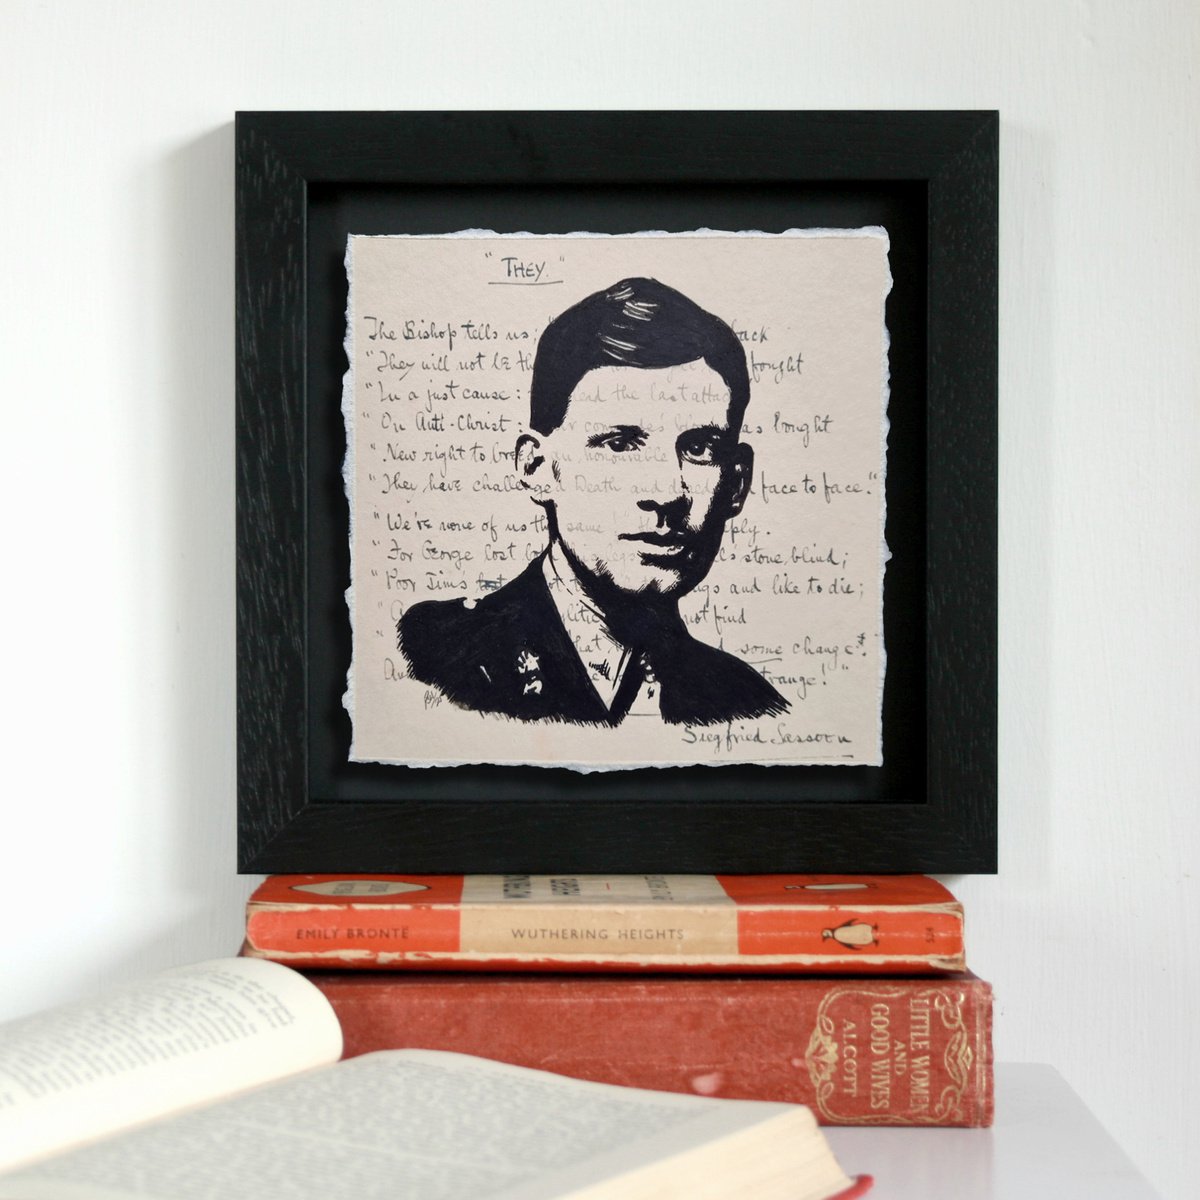 Siegfried Sassoon - They (Framed) by Peter Walters